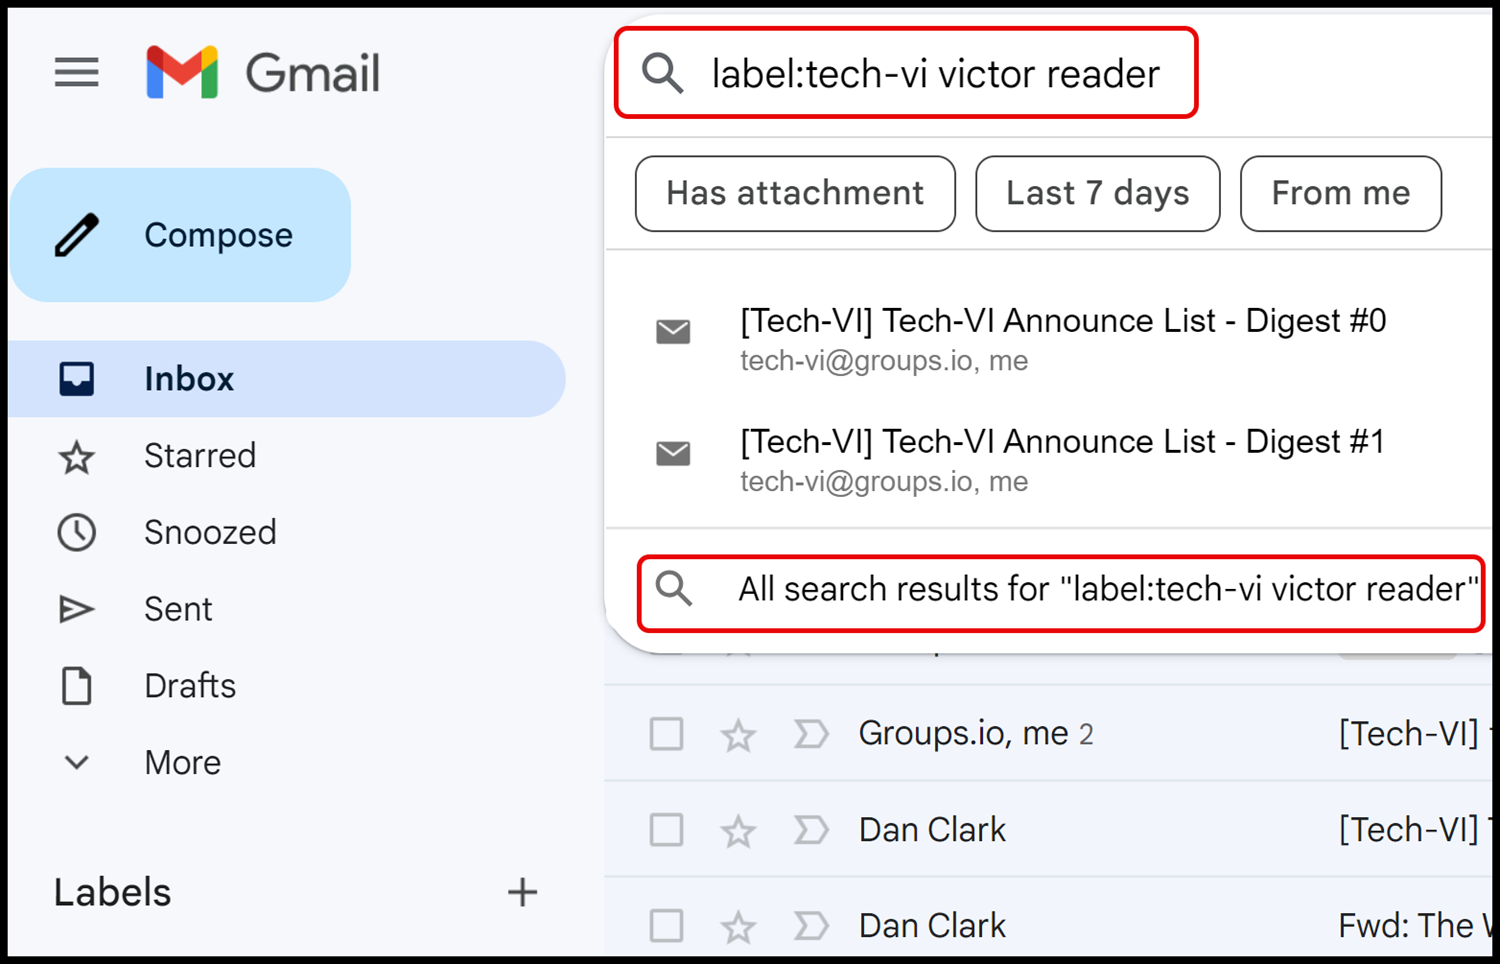 Search results for the label 'Tech-vi' and the phrase 'victor reader' appear in a list below the Search edit box. The Search phrase reads: label:tech-vi victor reader